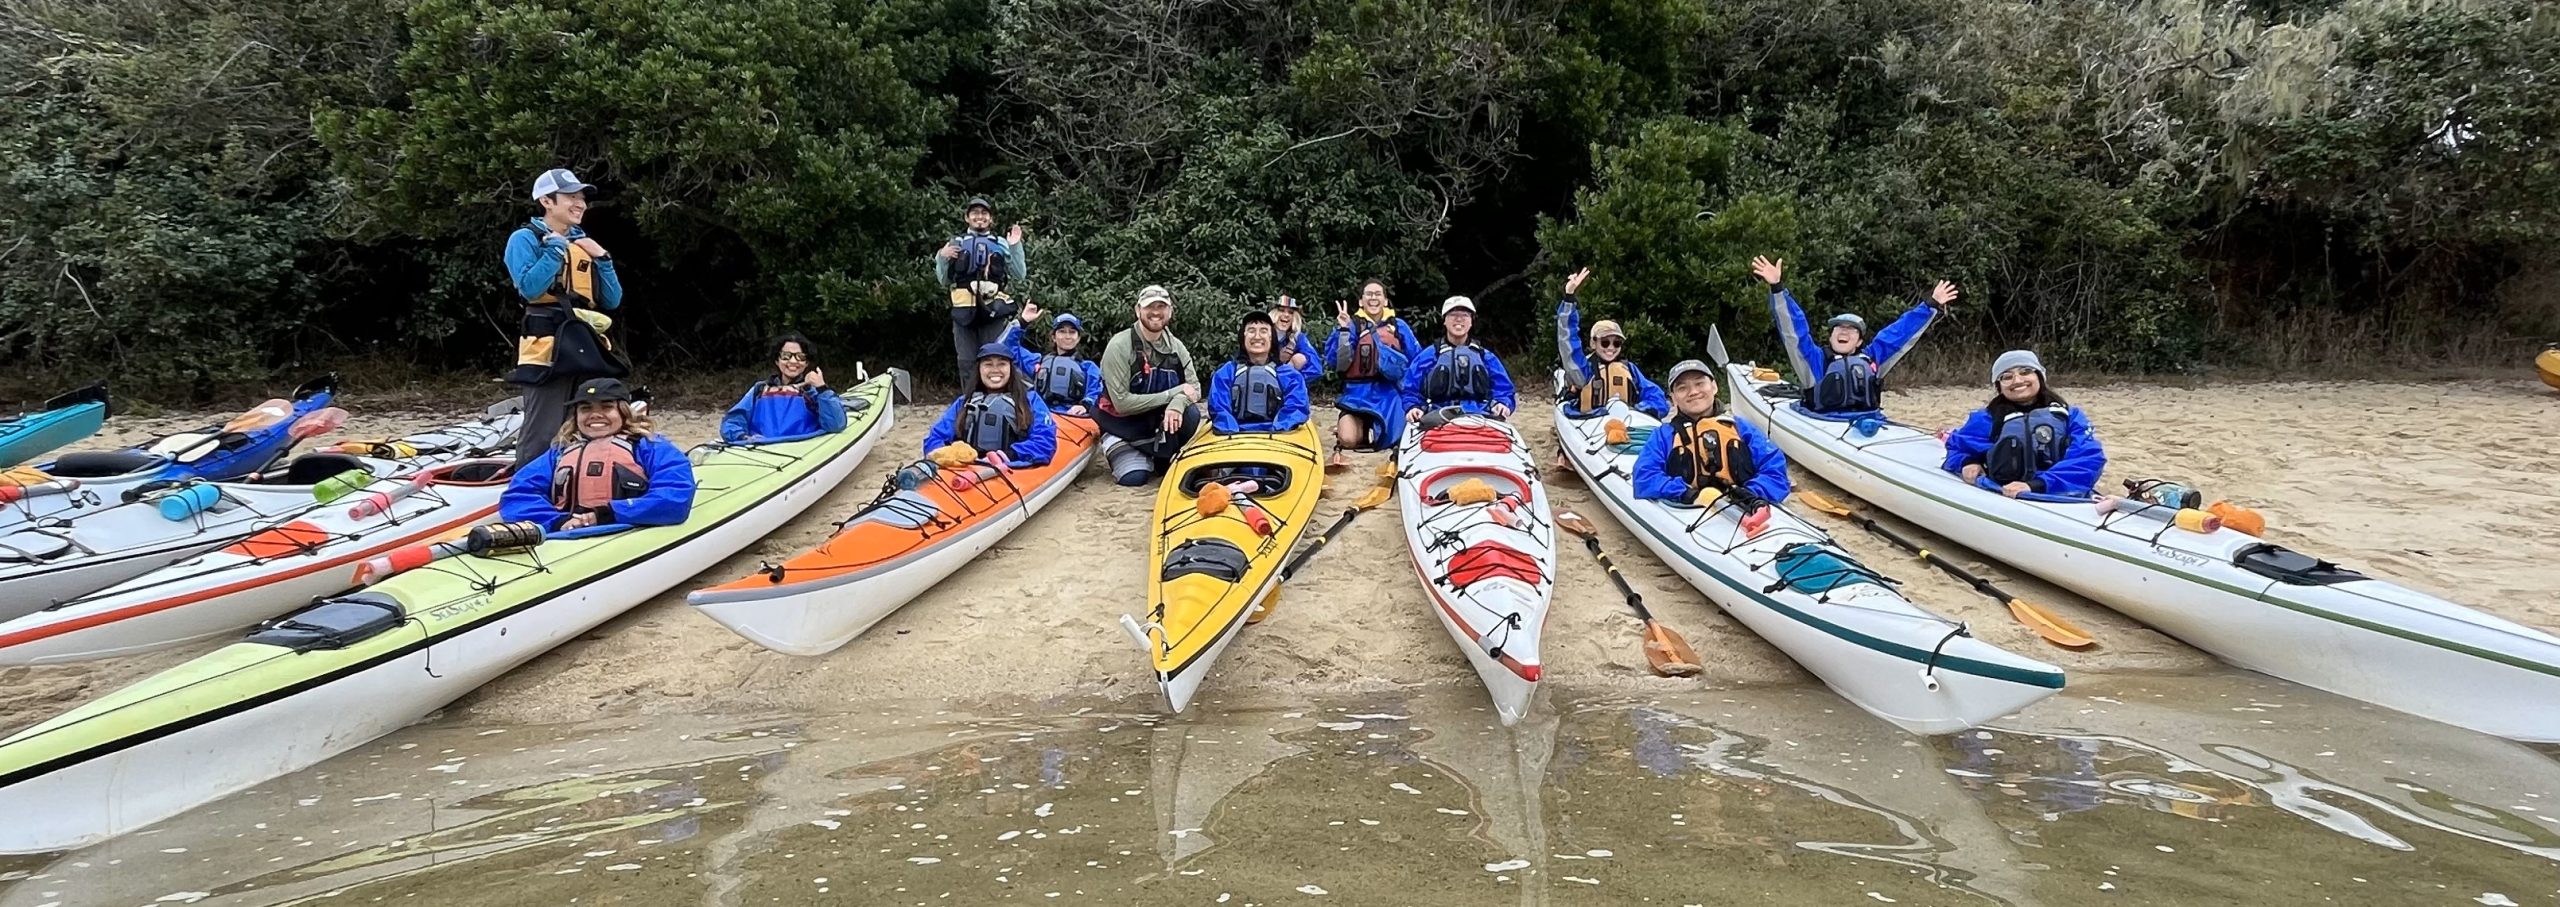 A group of young people of color on canoes near a body of water. They are wearing life jackets and smiling at the camera. 